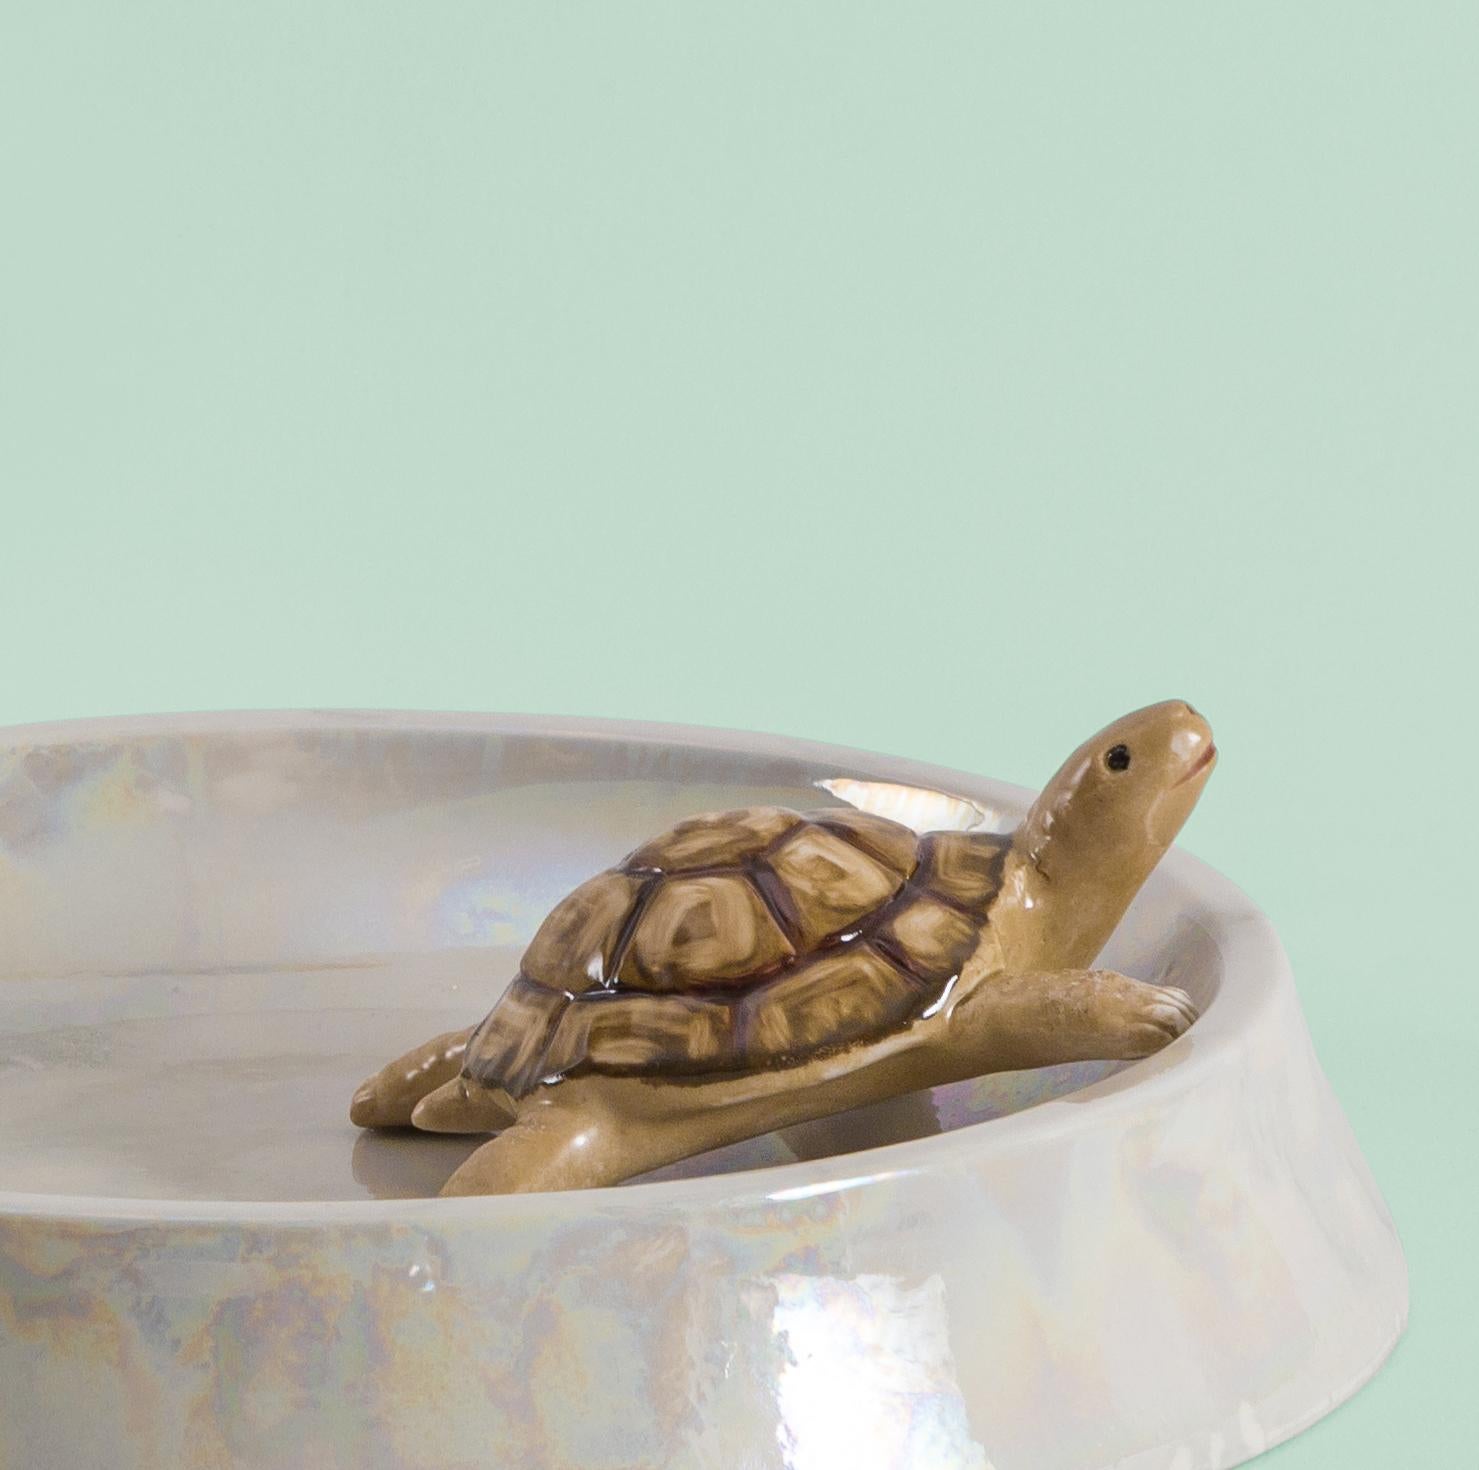 This Italian porcelain sculpture is part of Grand Tour by Vito Nesta. Made in Capodimonte porcelain with a glossy and iridescent finish. This pocket emptier is embellished by a hand painted turtle.